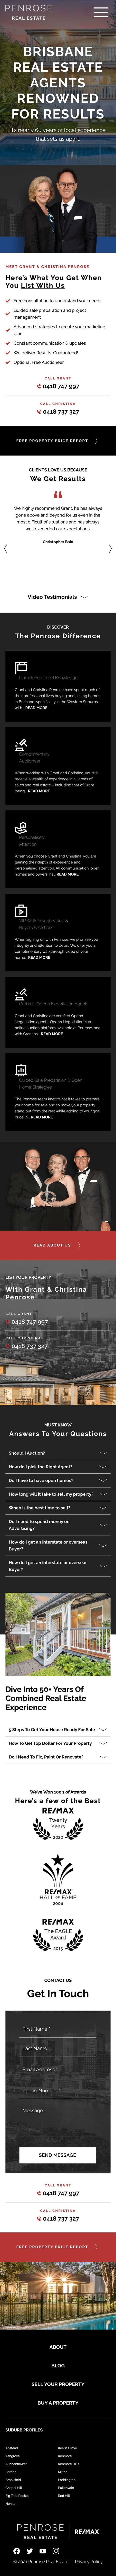 Penrose Home Page Mobile